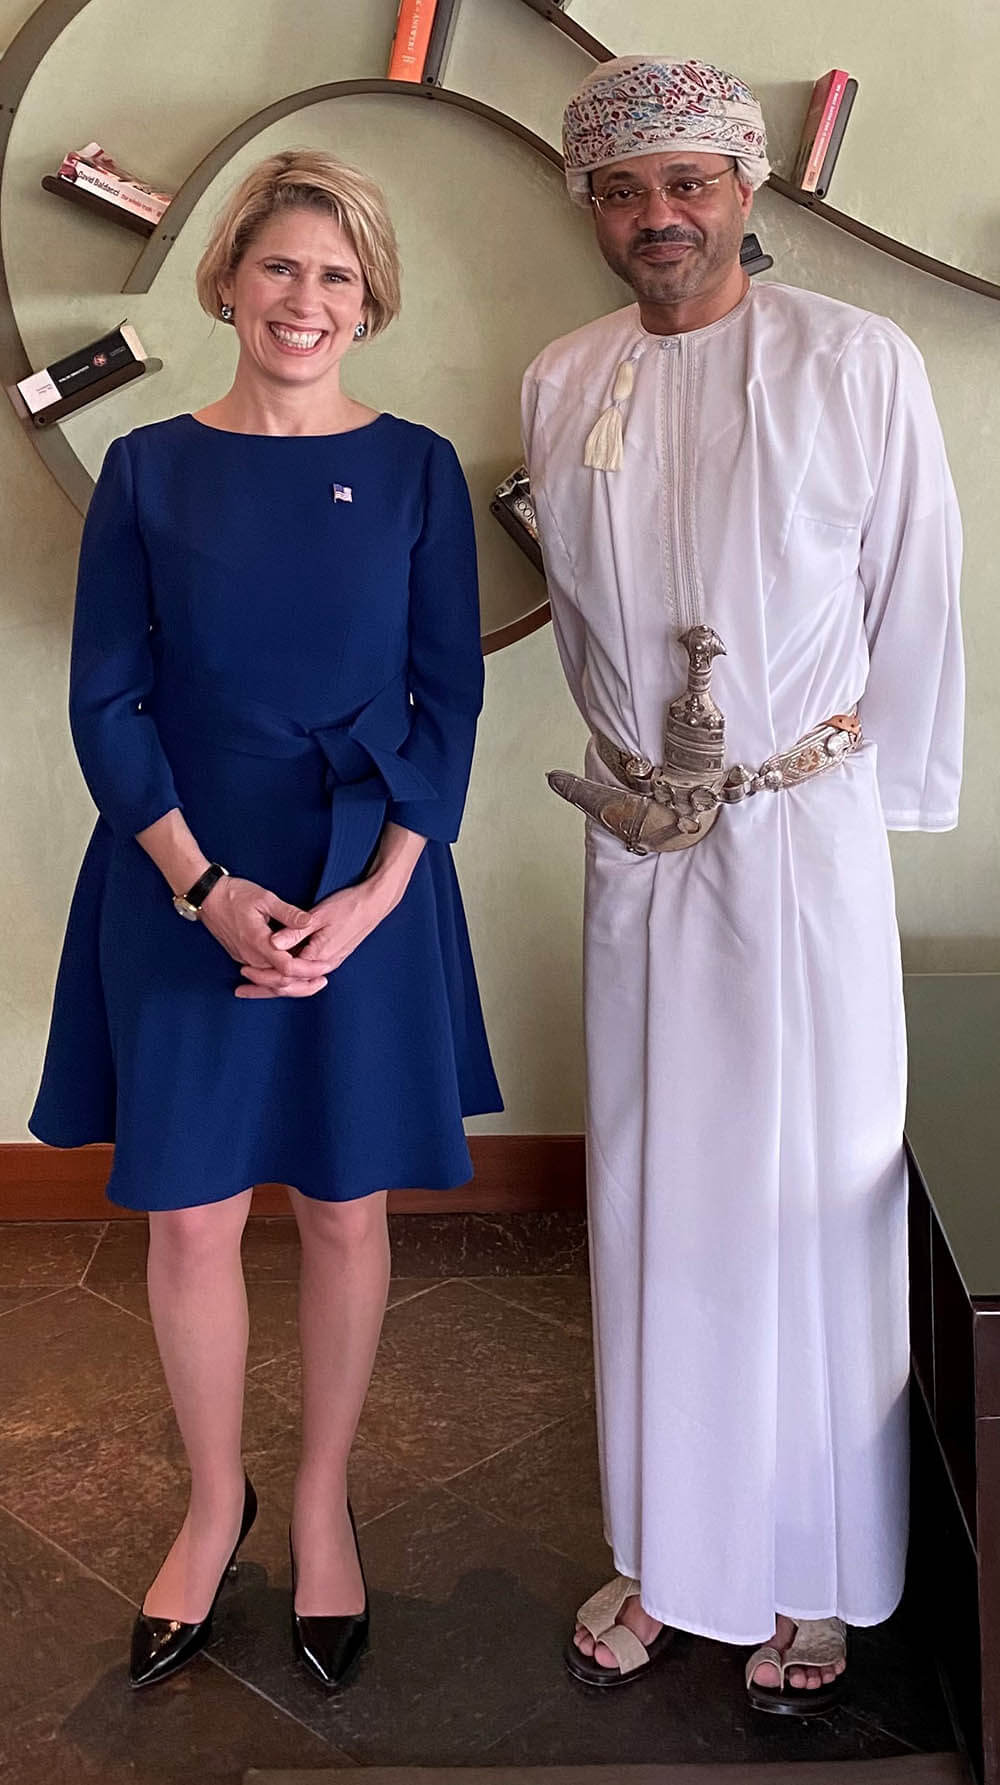 EXIM Chairman Kimberly Reed and His Excellency Sayyid Badr bin Hamad bin Hamood Albusaidi, Minister of Foreign Affairs of the Sultanate of Oman